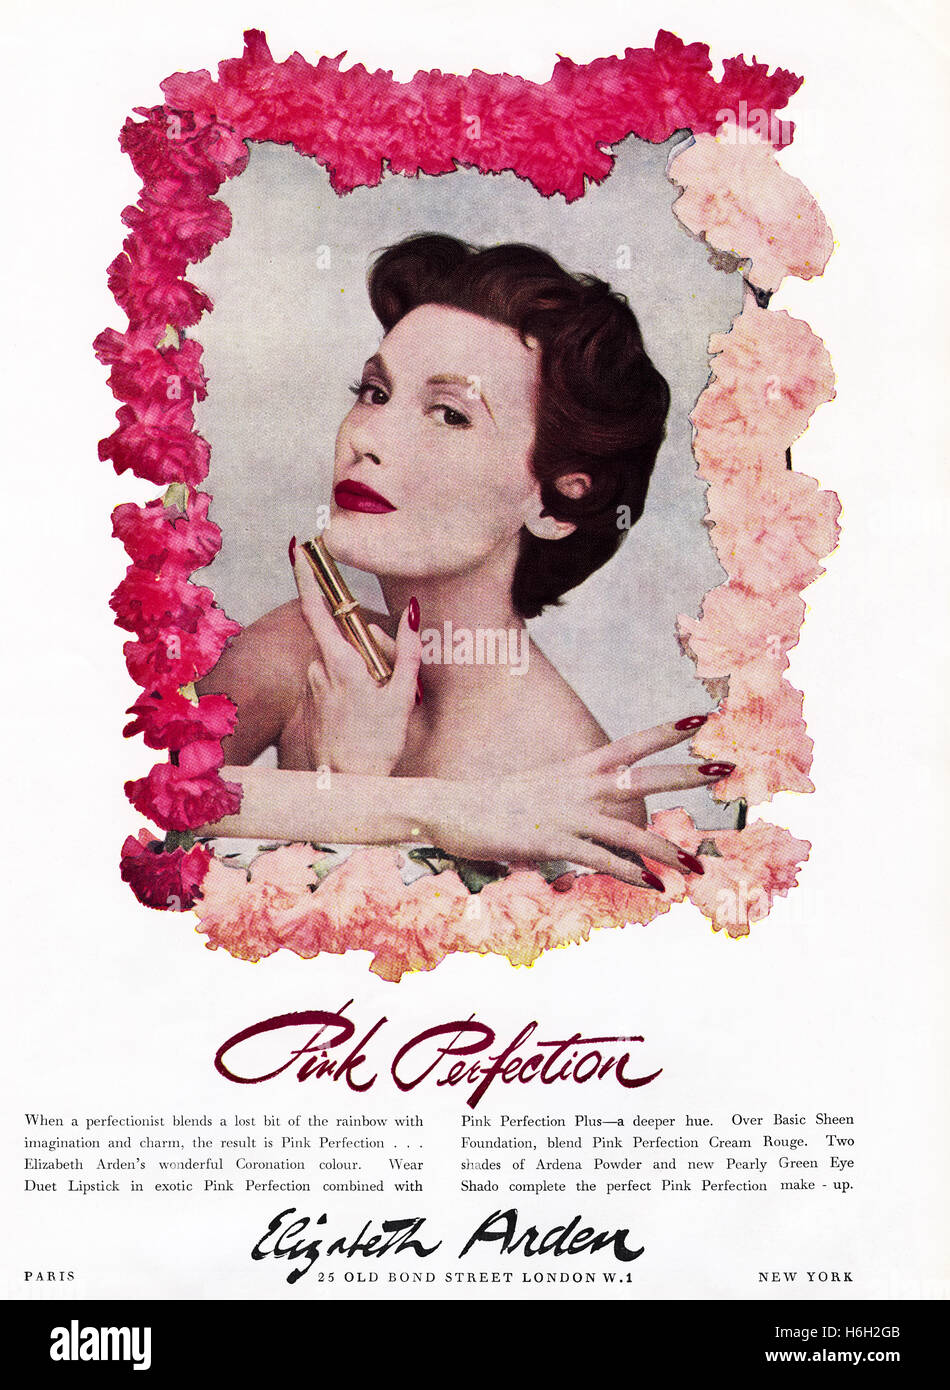 1950s advertising advert from original old vintage English magazine dated 1953 advertisement for Pink Perfection lipstick by Elizabeth Arden cosmetics Stock Photo